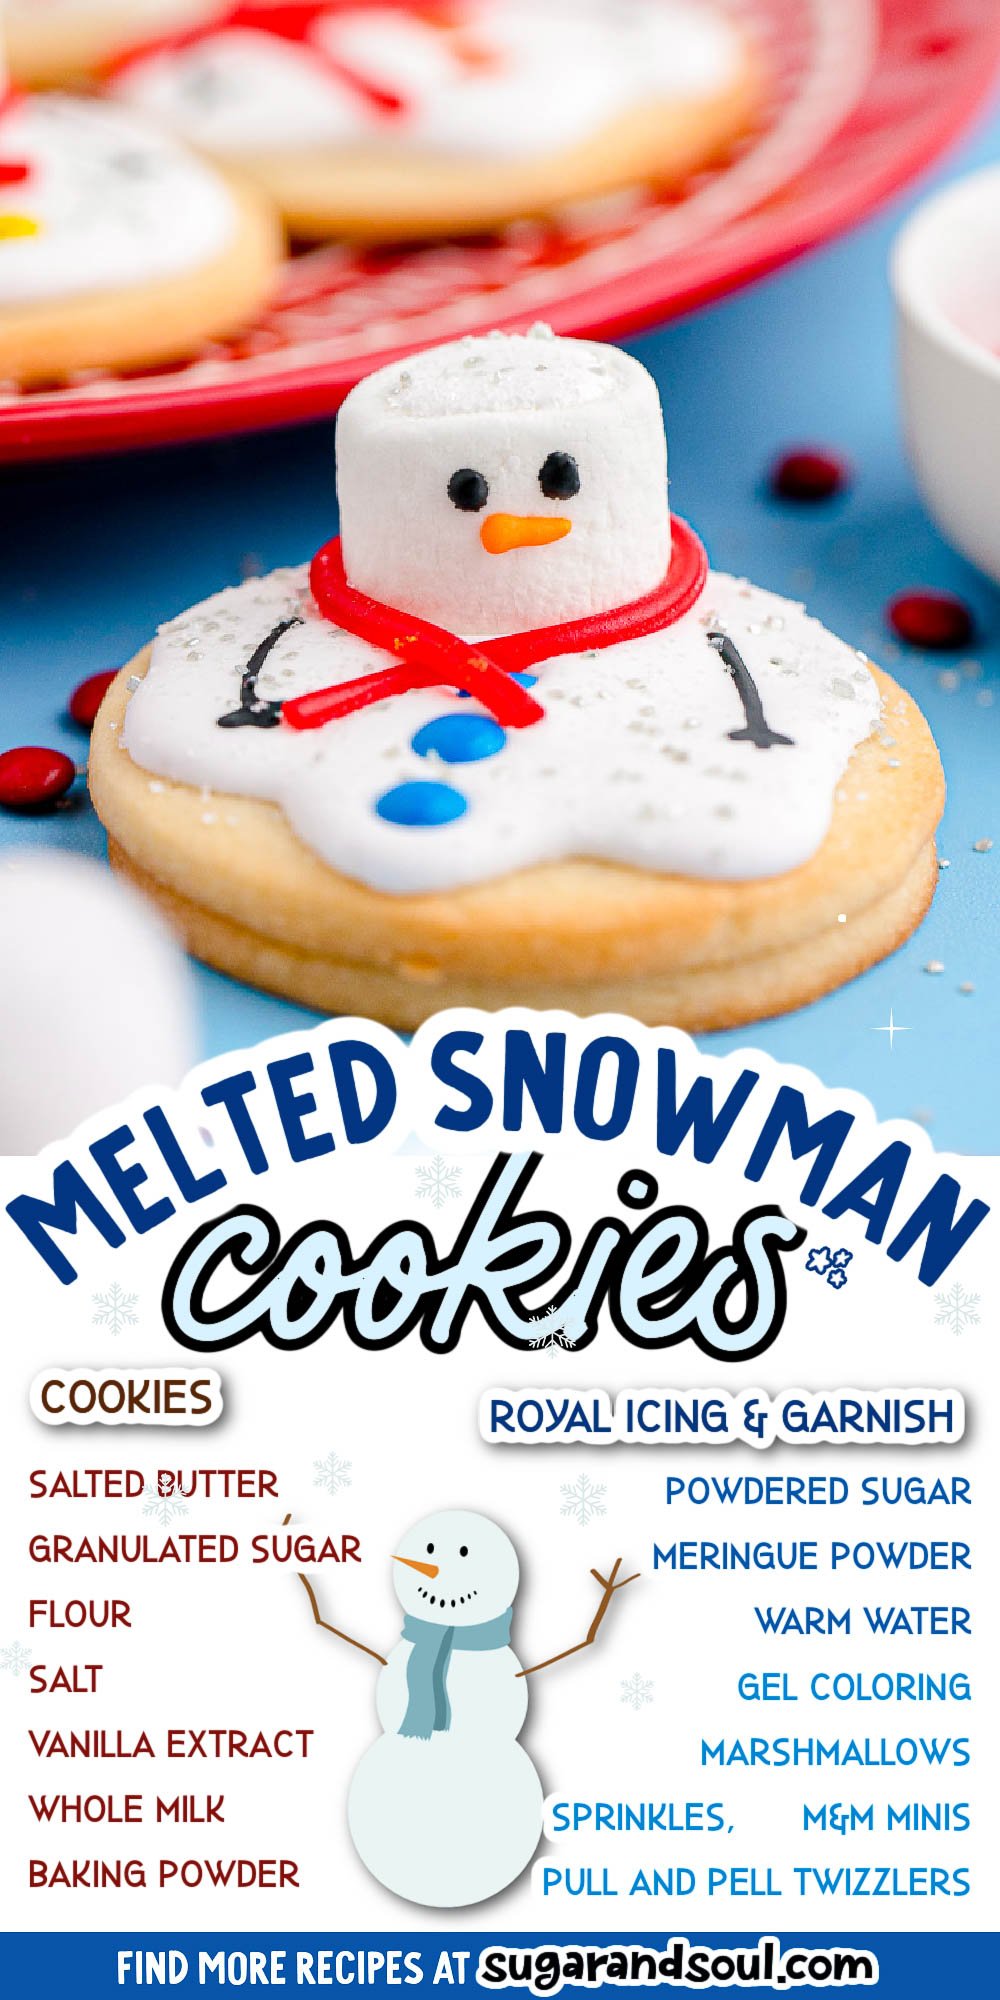 These Melted Snowman Cookies are homemade cookies that get covered in a 3-ingredient royal icing, and garnishes to dress them up as snowmen! Prep these fun cookies in just 30 minutes! via @sugarandsoulco